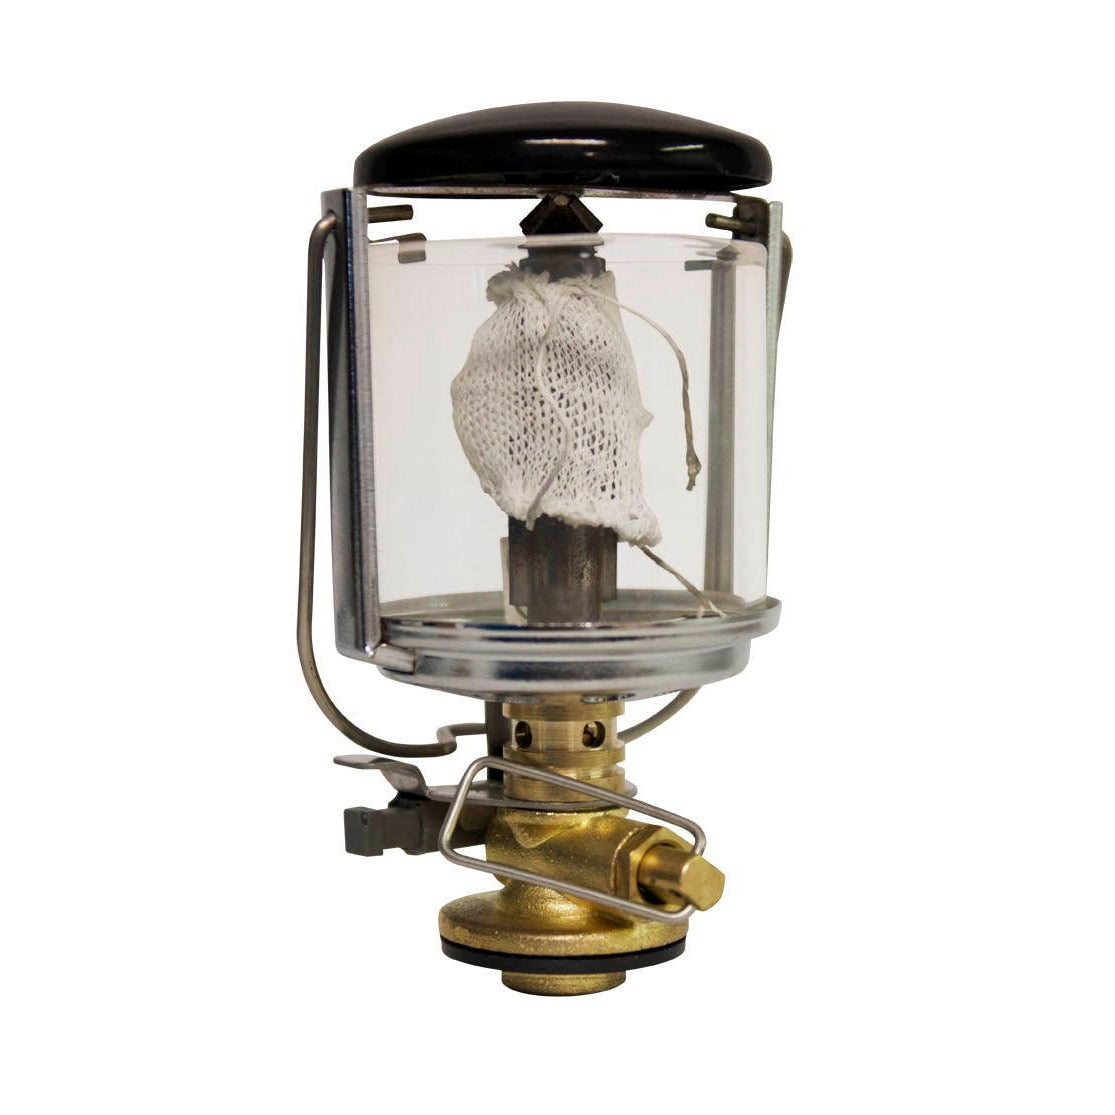 CHIMNEY GLASS REPLACEMENT FOR CCR104 100CP BUTANE CANISTER LAMP - Alva Lifestyle Retail